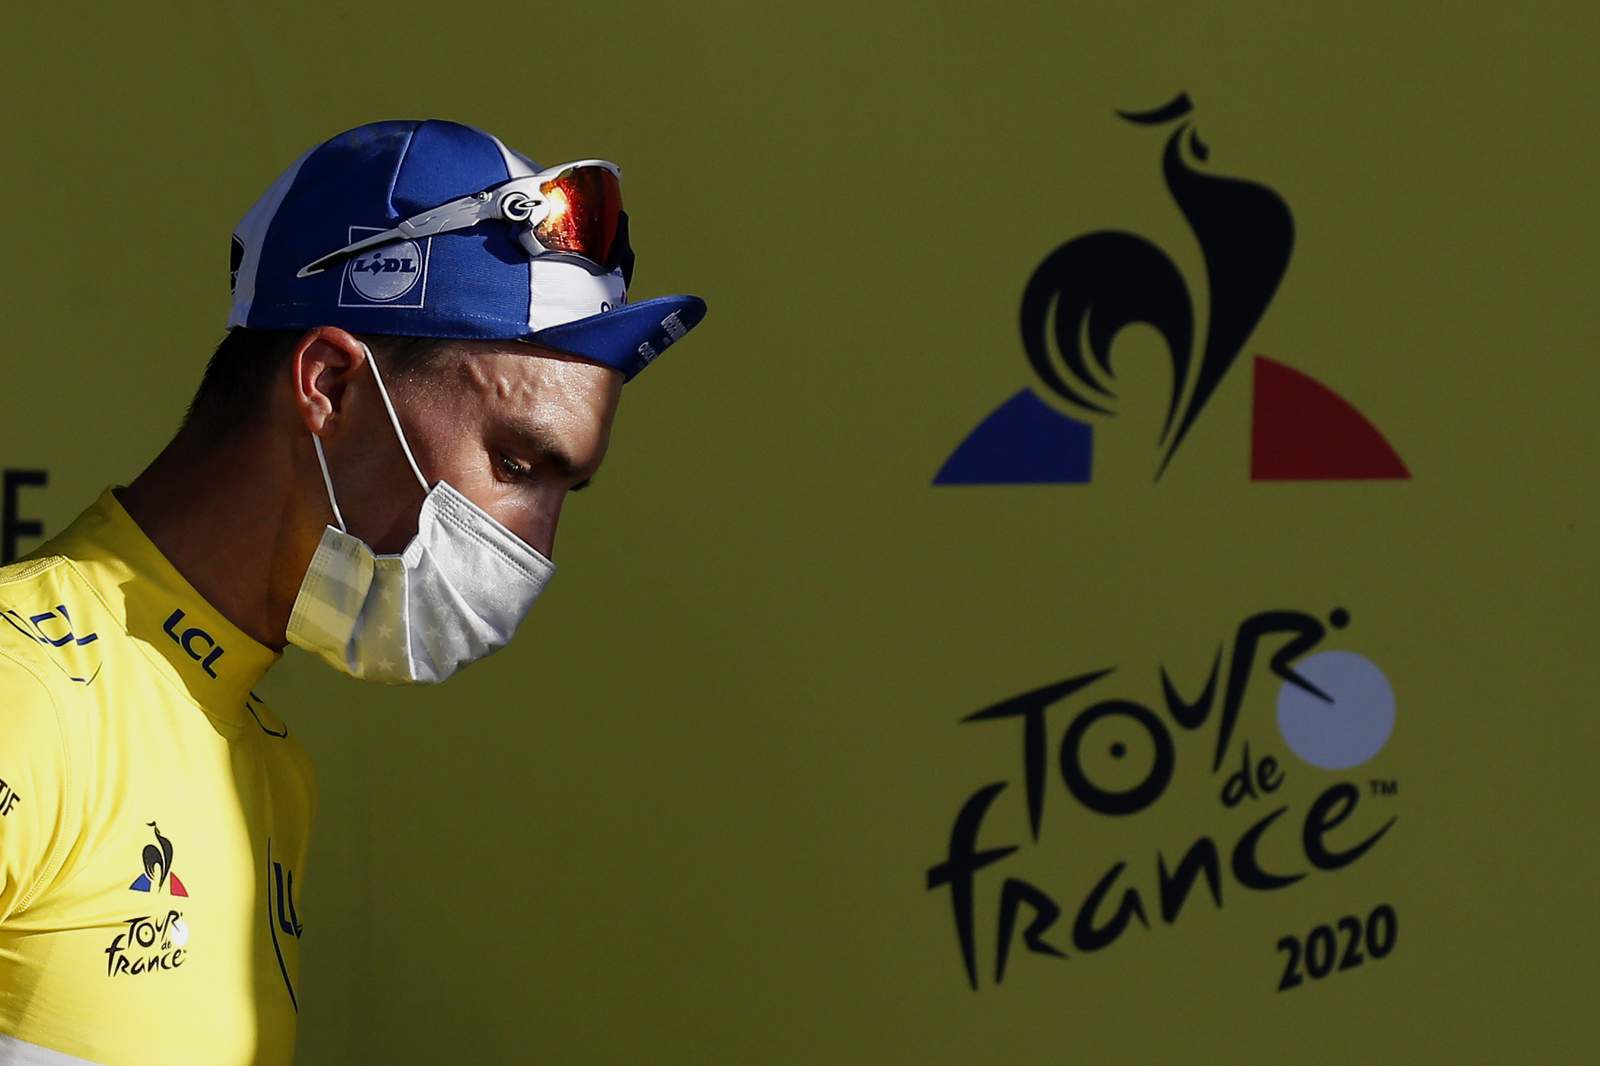 For his father: A poignant Alaphilippe win at Tour de France